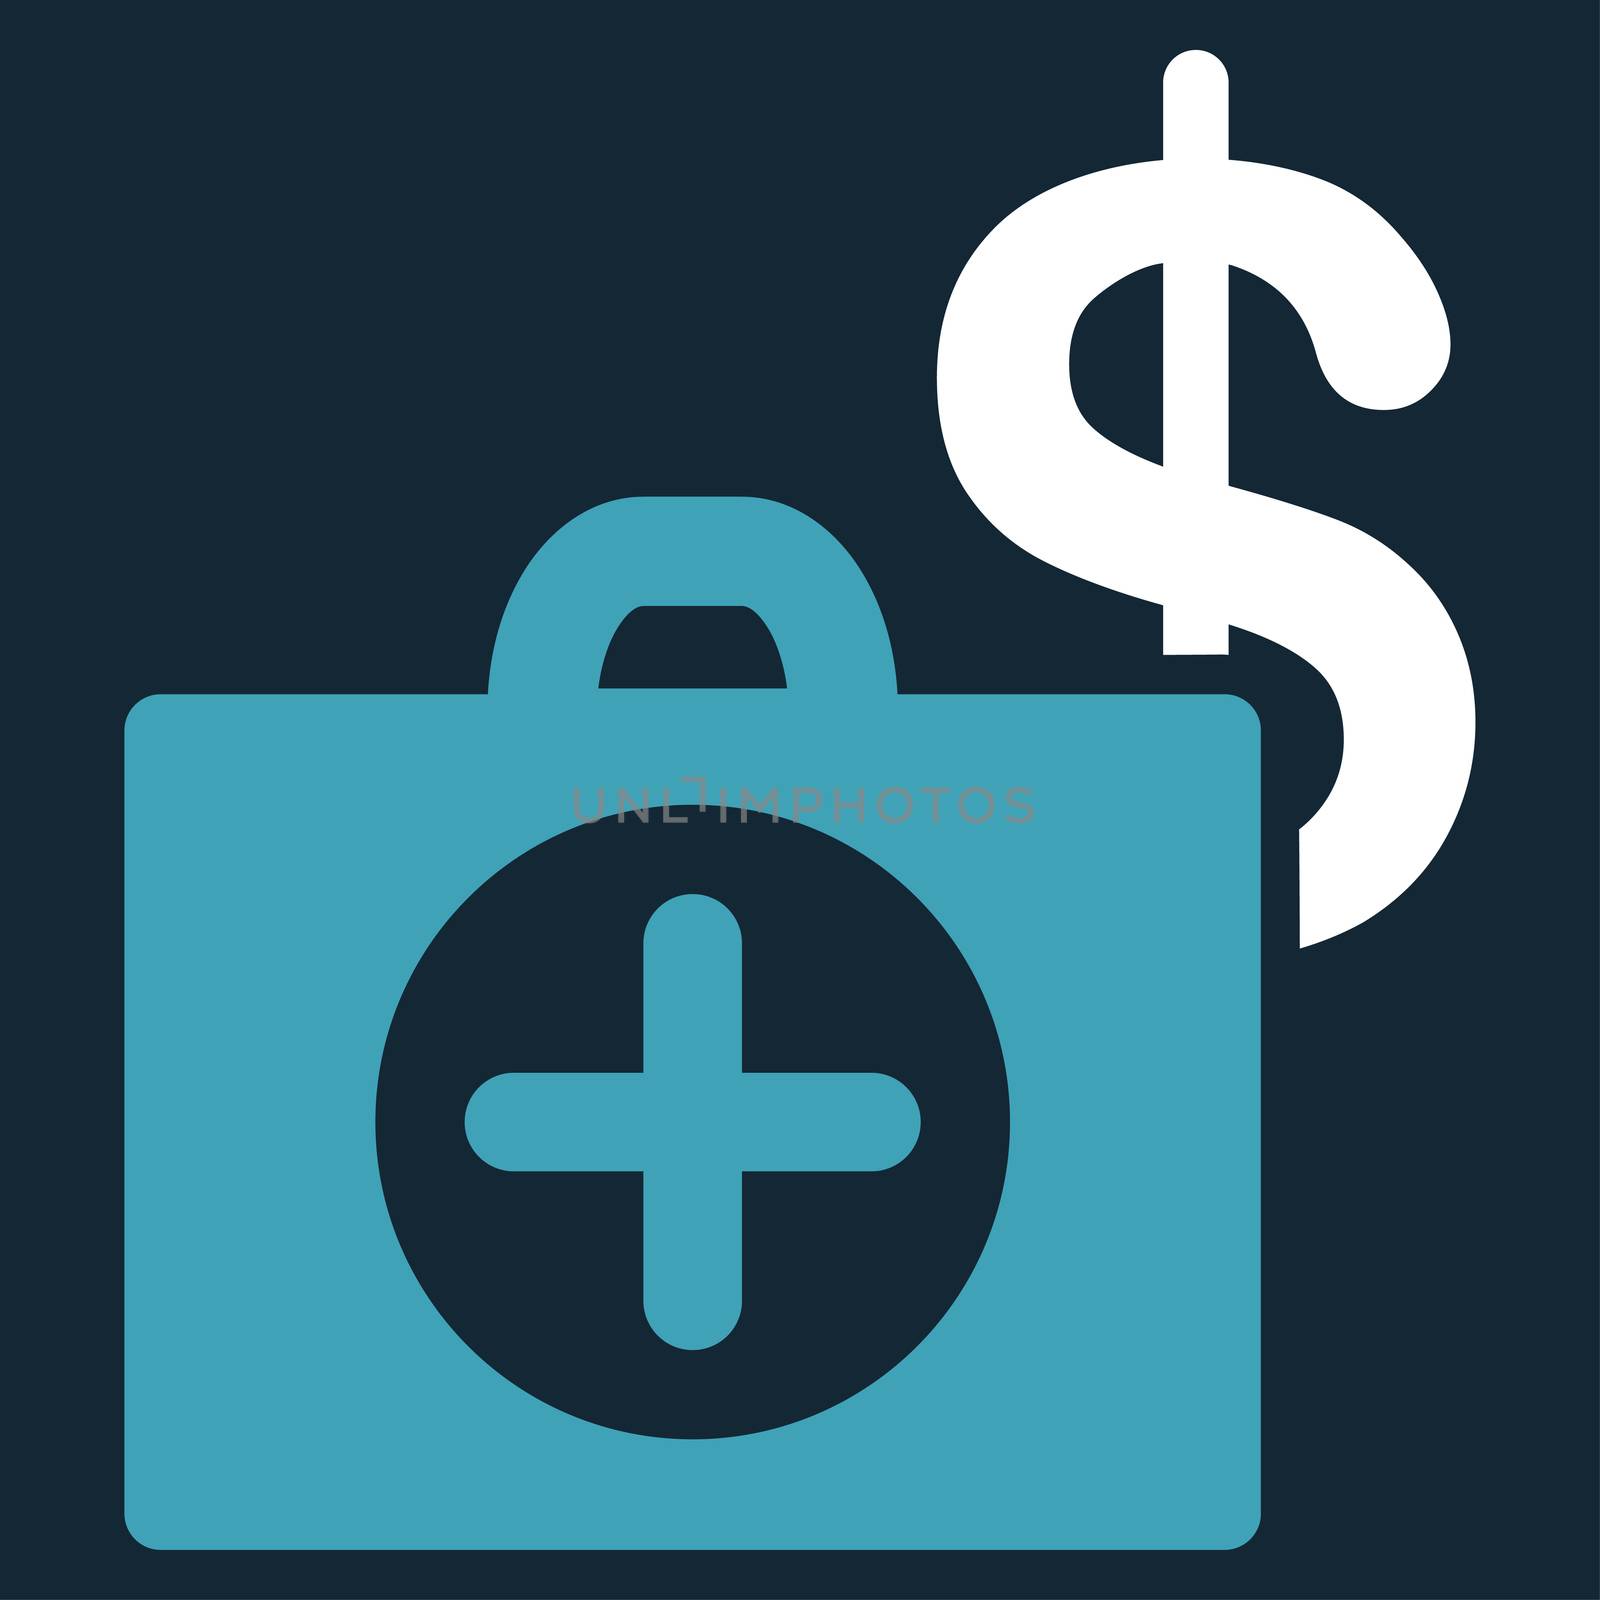 Payment Healthcare raster icon. Style is bicolor flat symbol, blue and white colors, rounded angles, dark blue background.